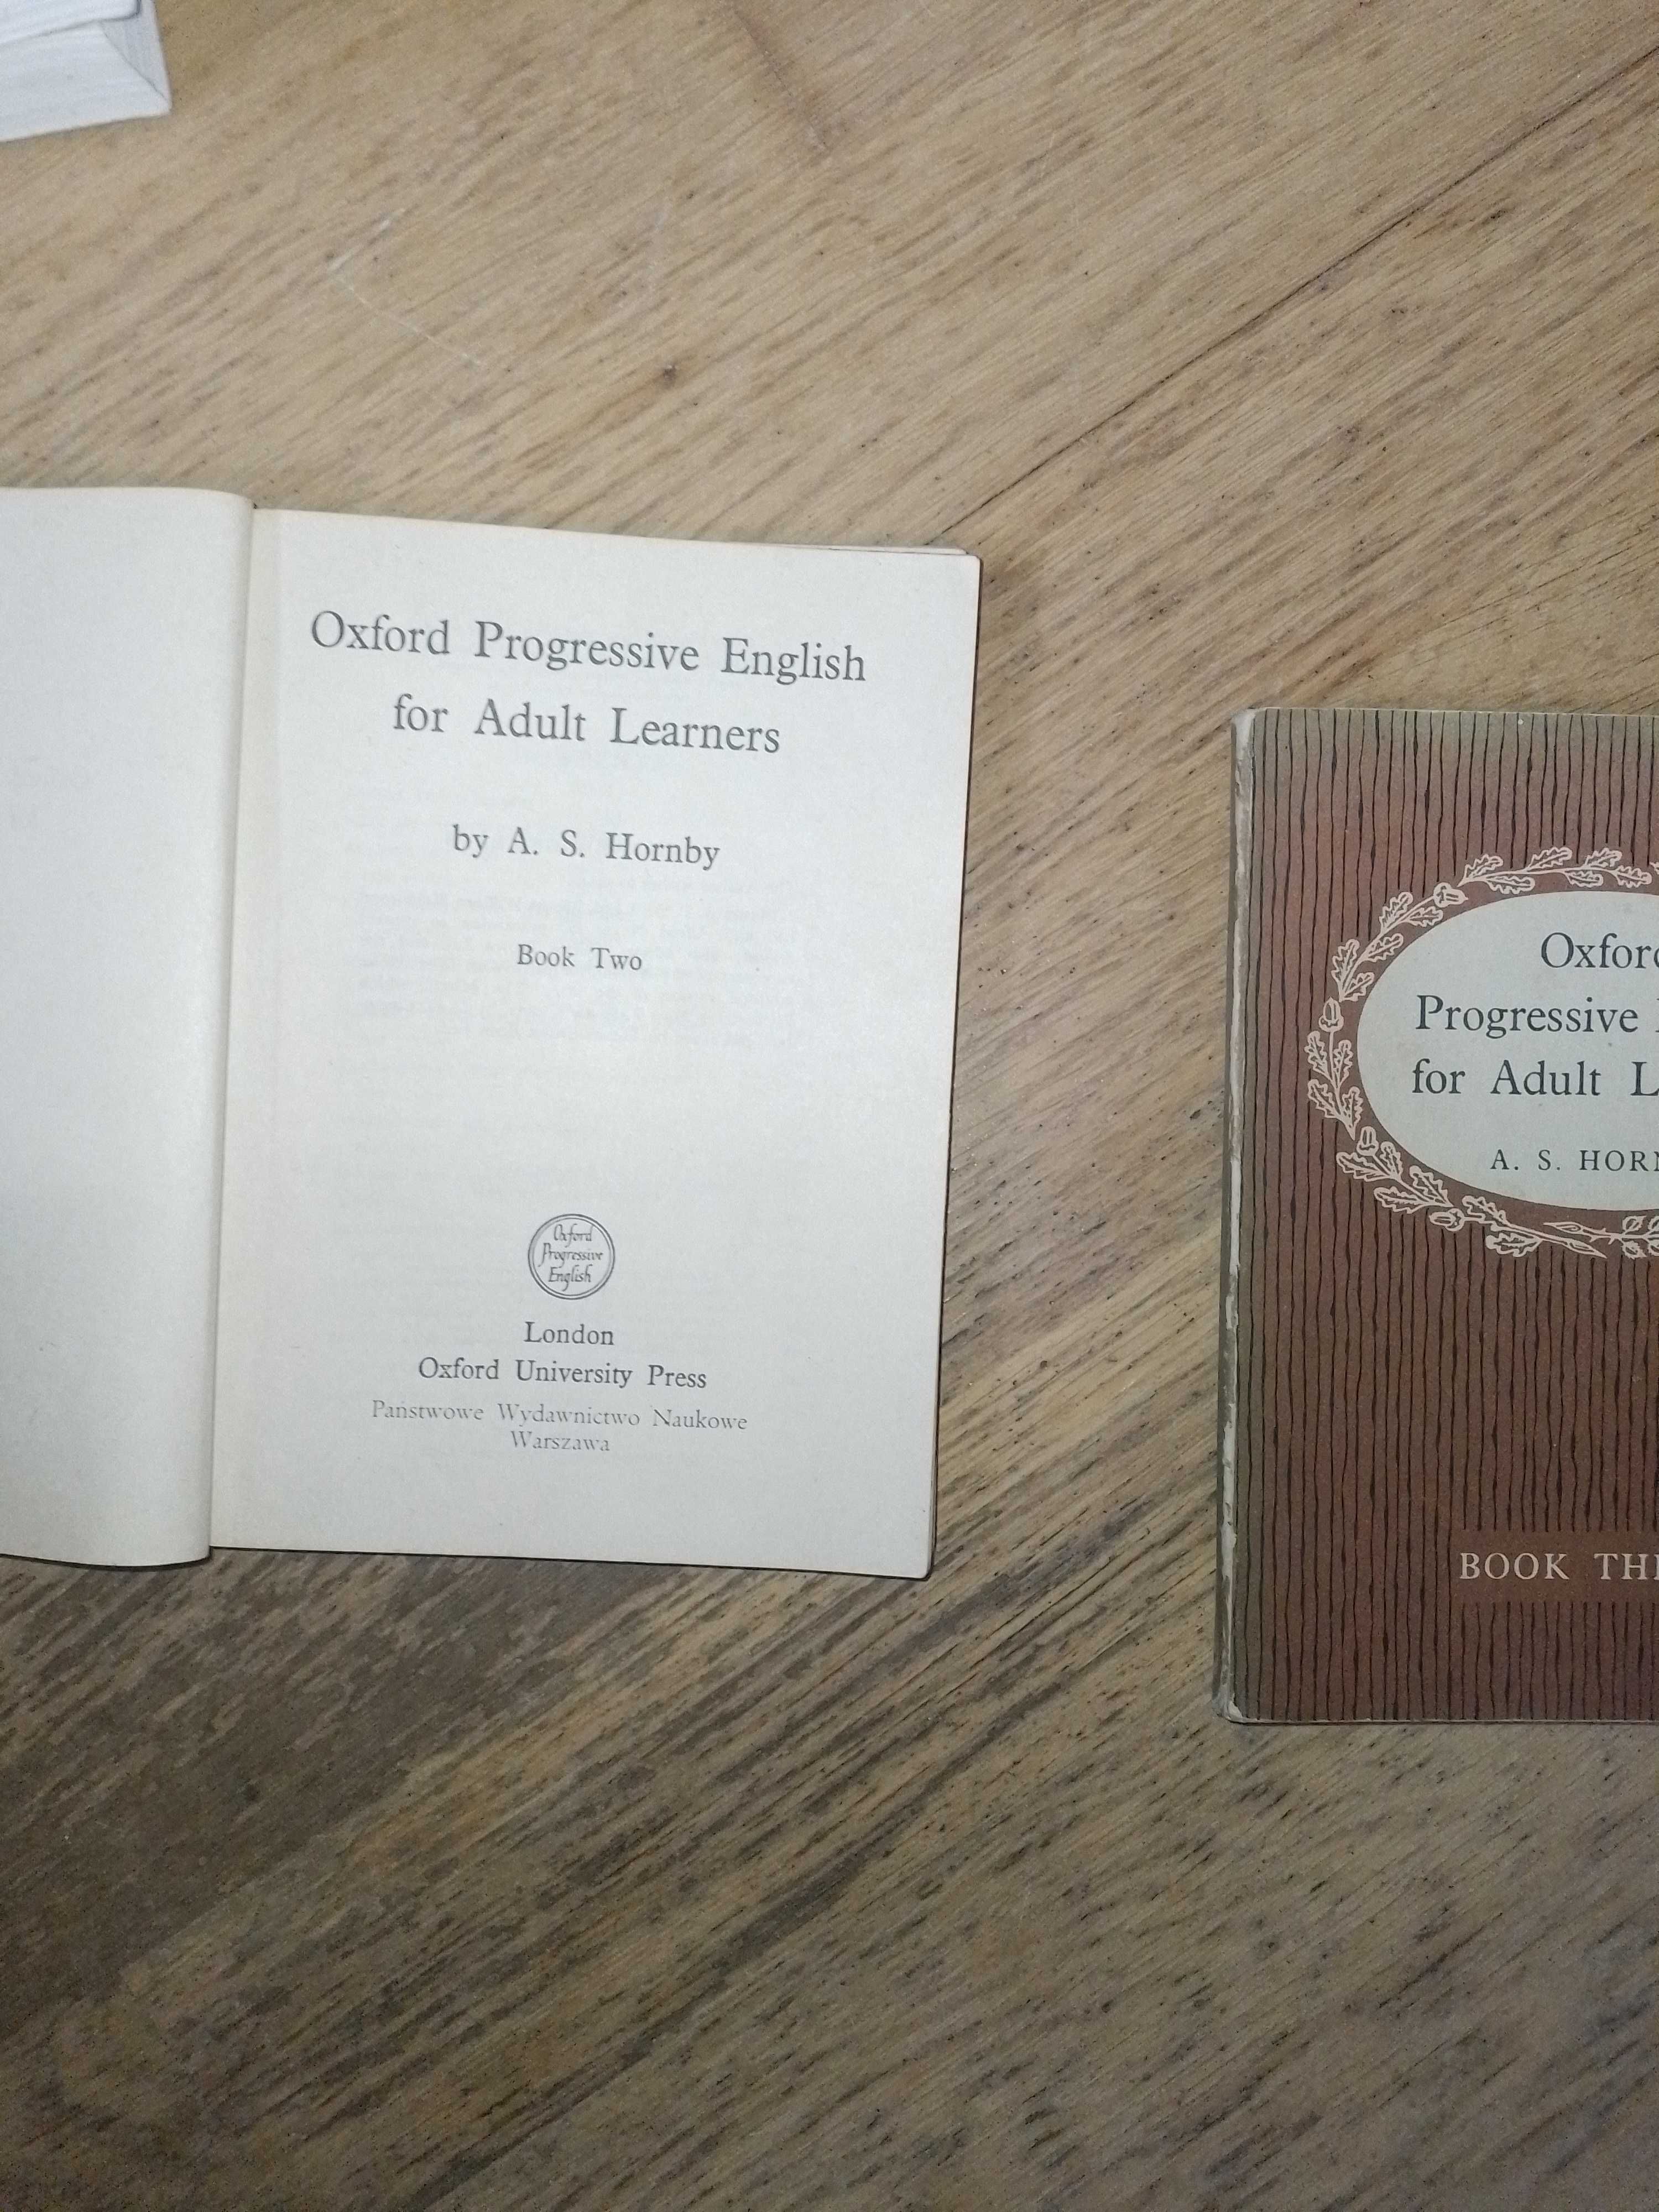 Oxford progressive english for adult learners, A.S. Hornby book 2, 3